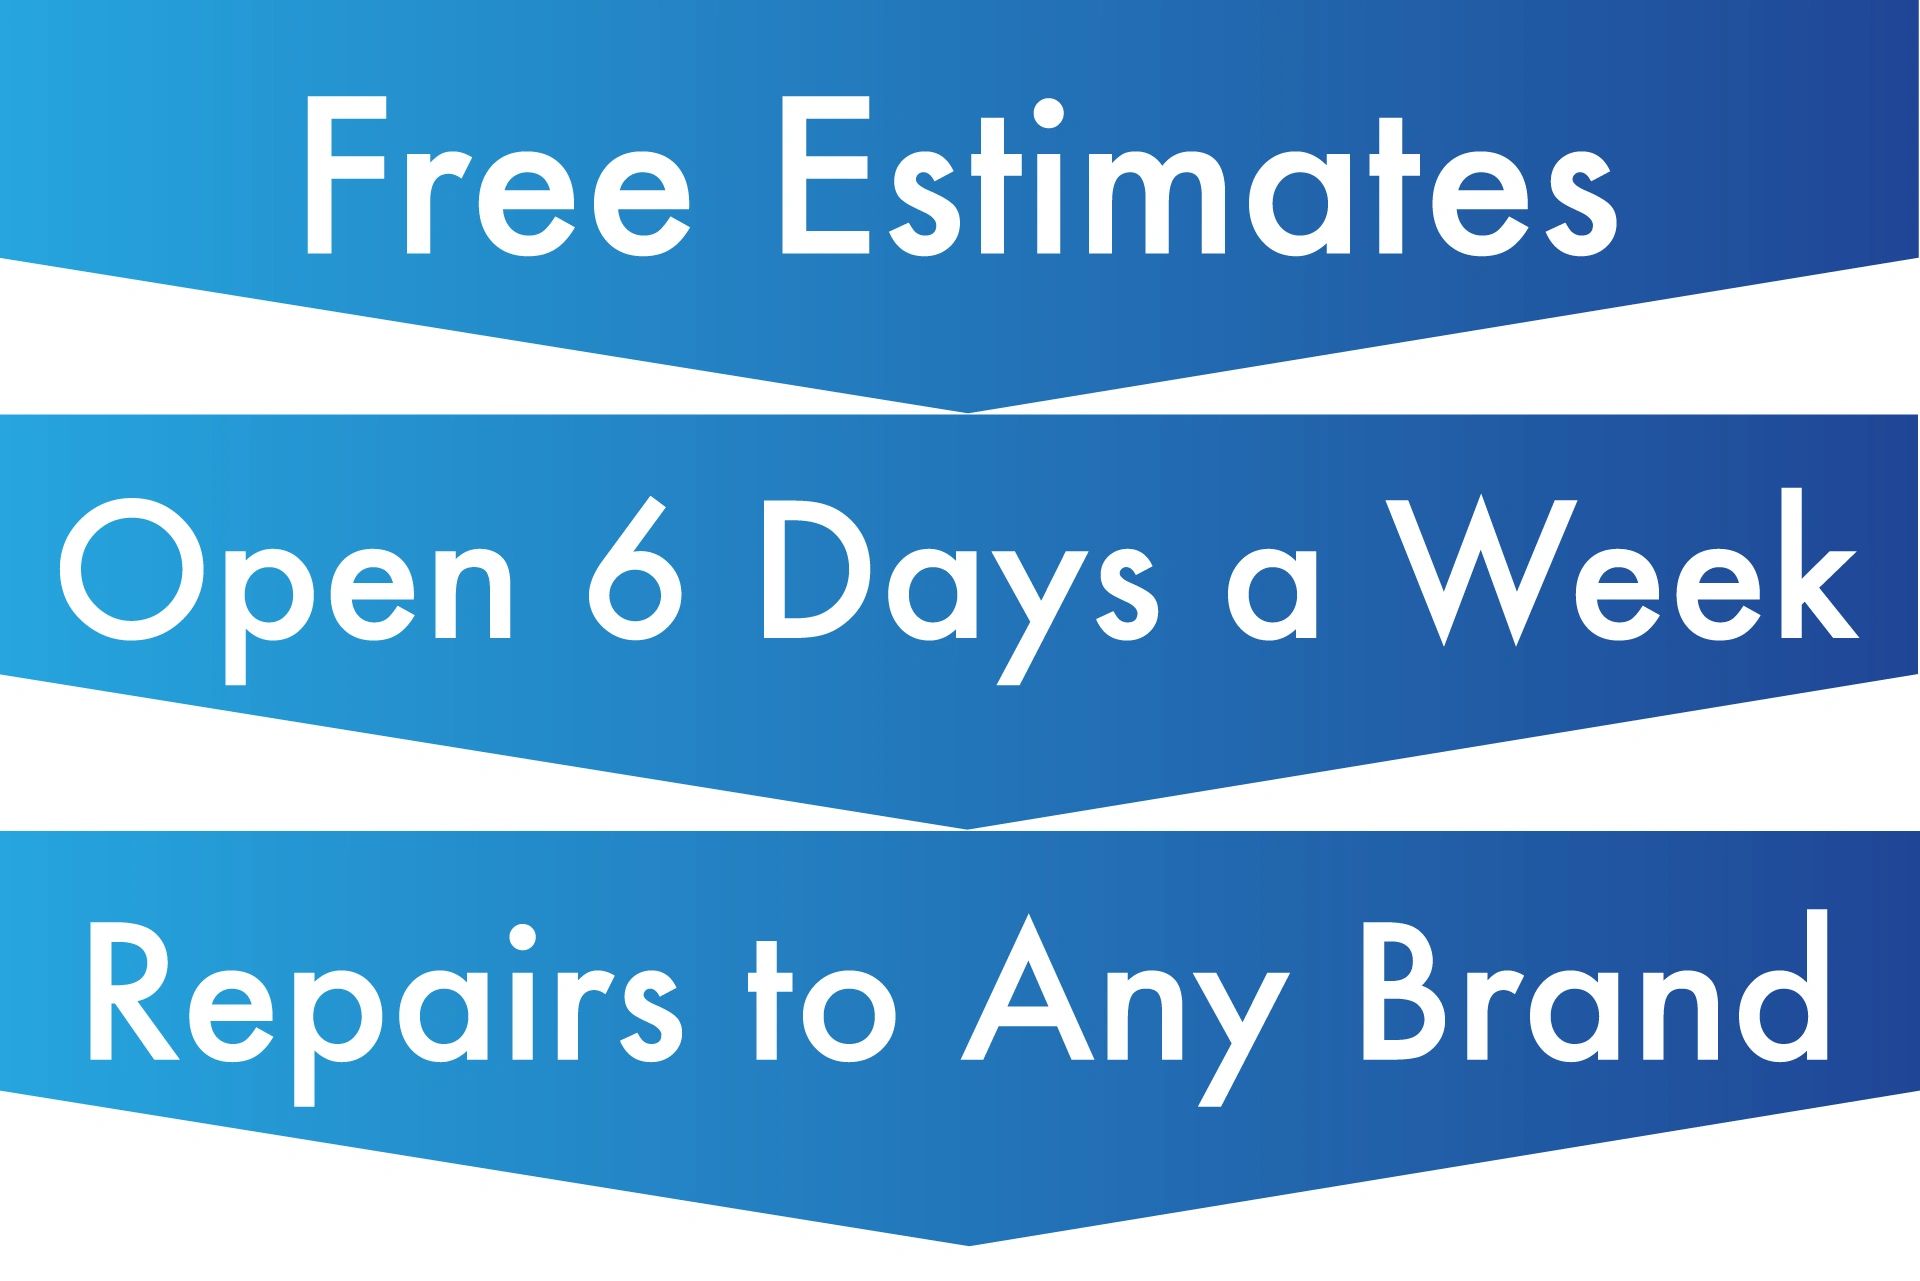 Free Estimates, Open 6 Days a Week, Repairs to Any Brand